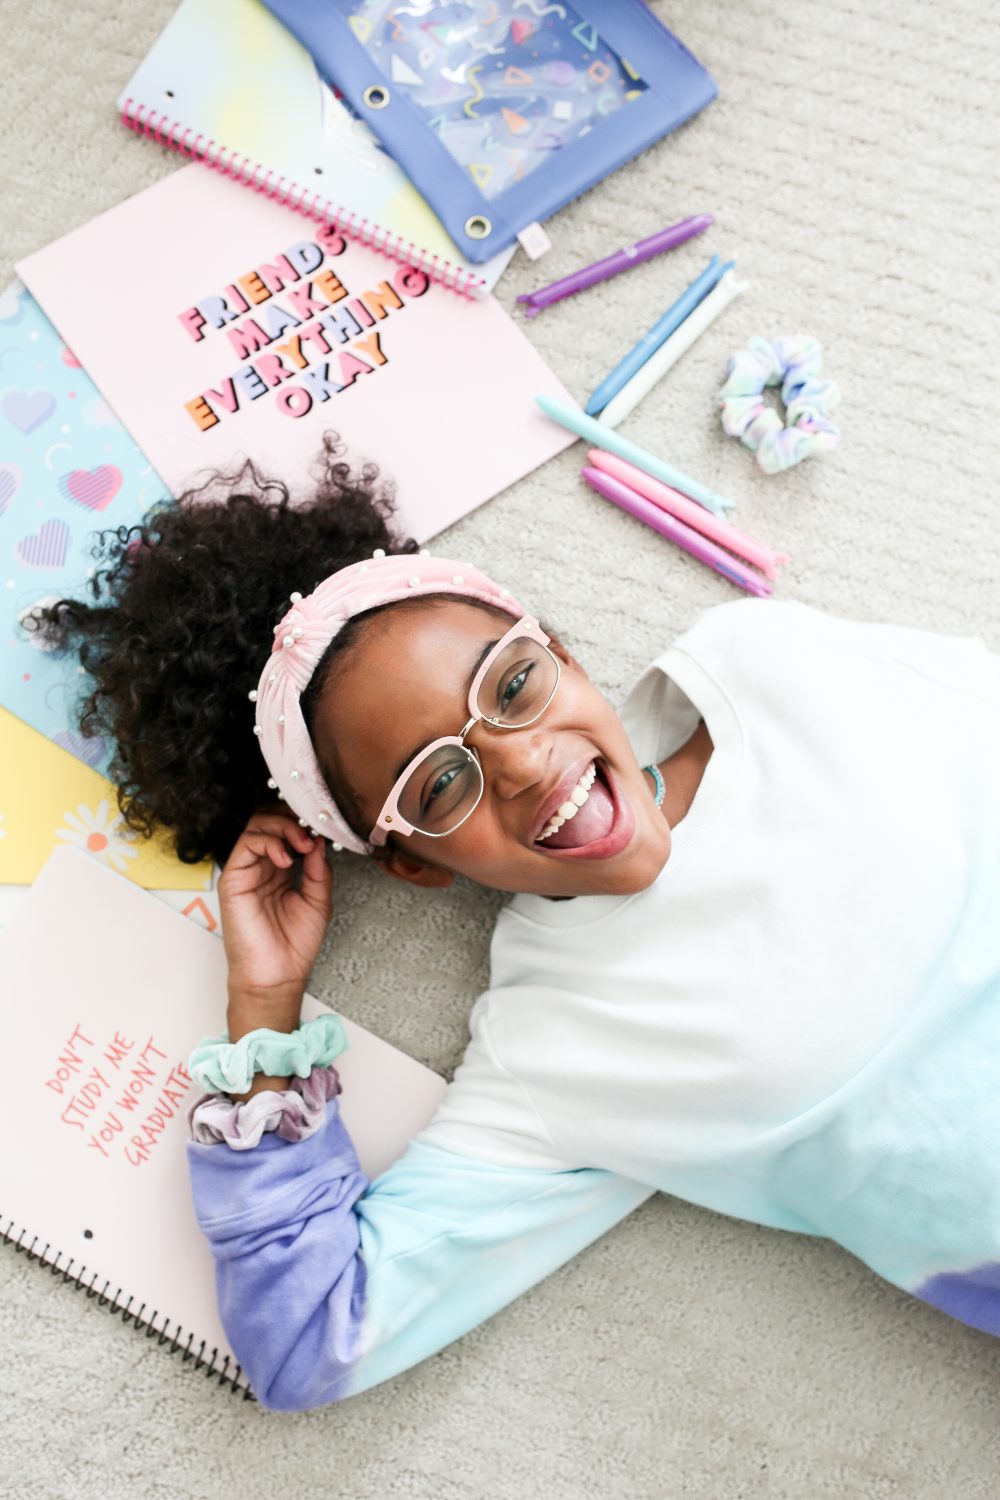 If Your Tween Girl Loves Fashion, Then She’ll Love These Adorable Outfits From Target